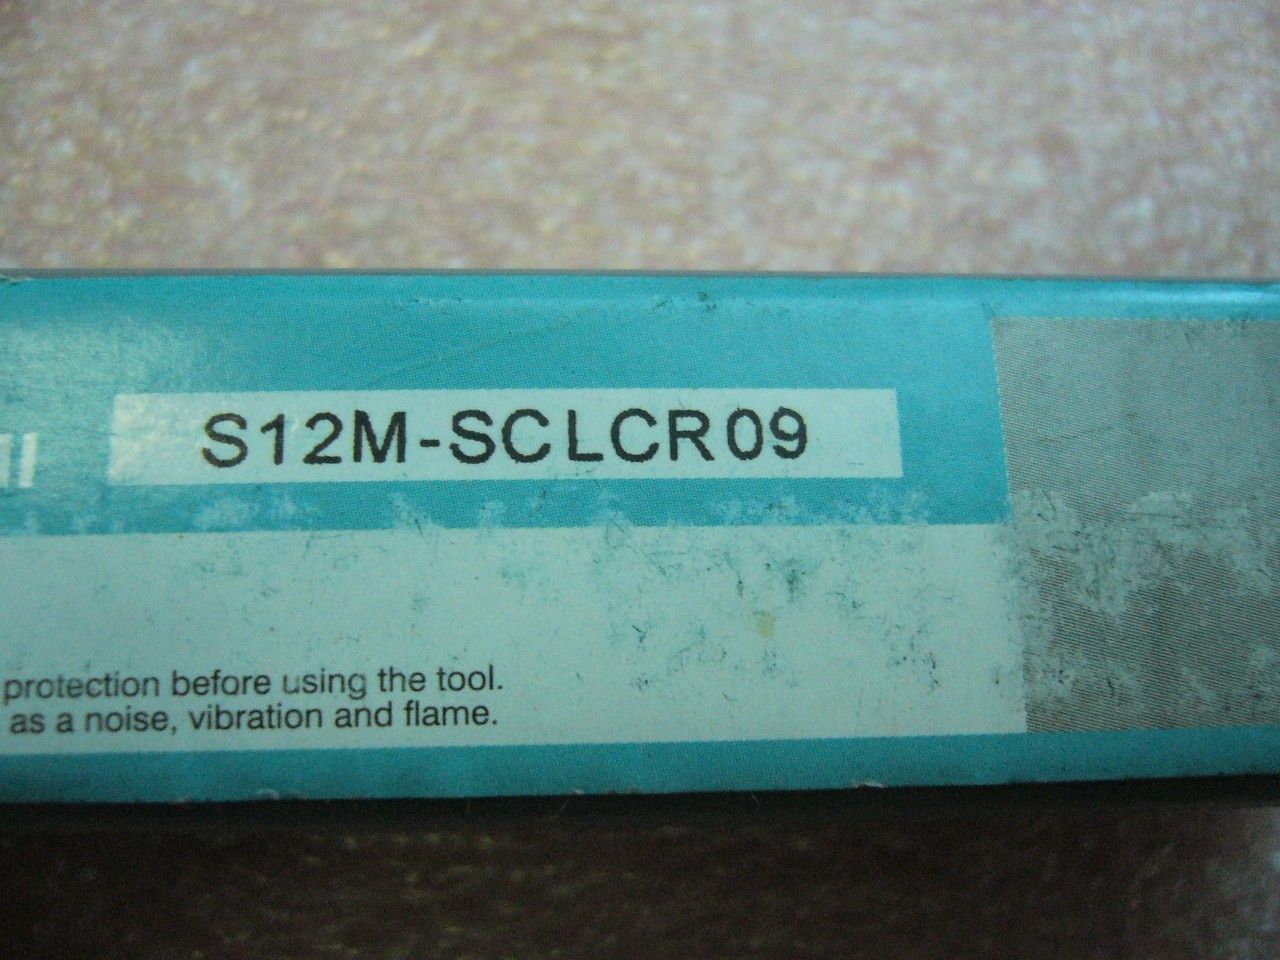 Boring Toolholder S12M-SCLCR09 for inserts CCMT09T3.. CCMT32.5...